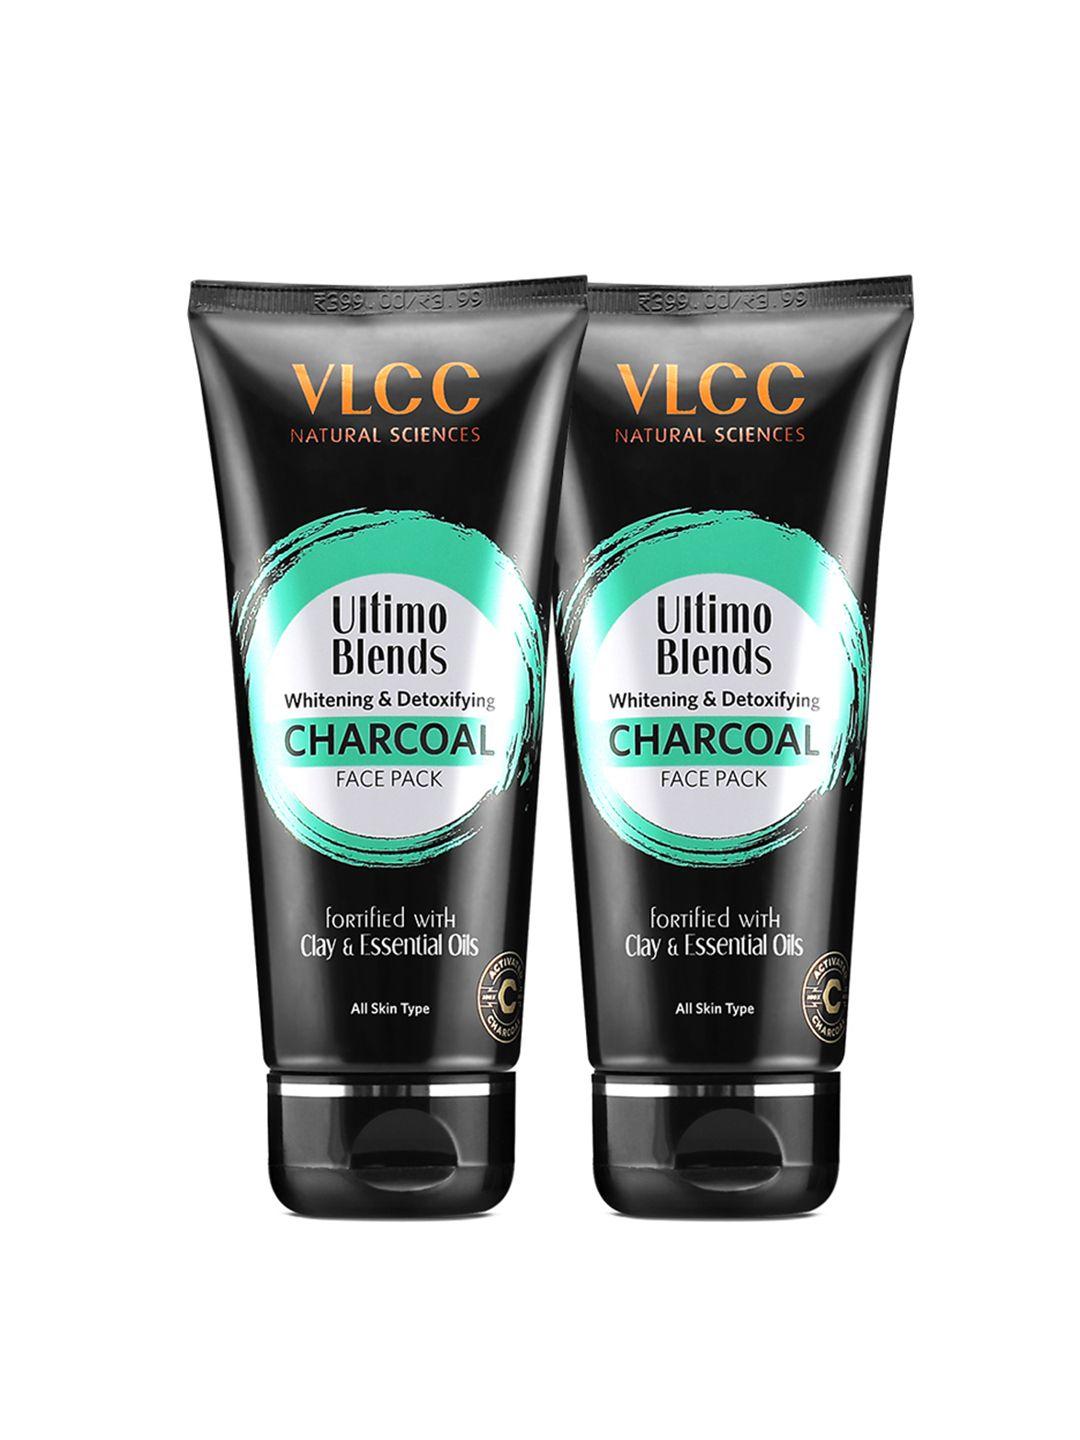 vlcc set of 2 ultimo blends charcoal face pack - 100g each